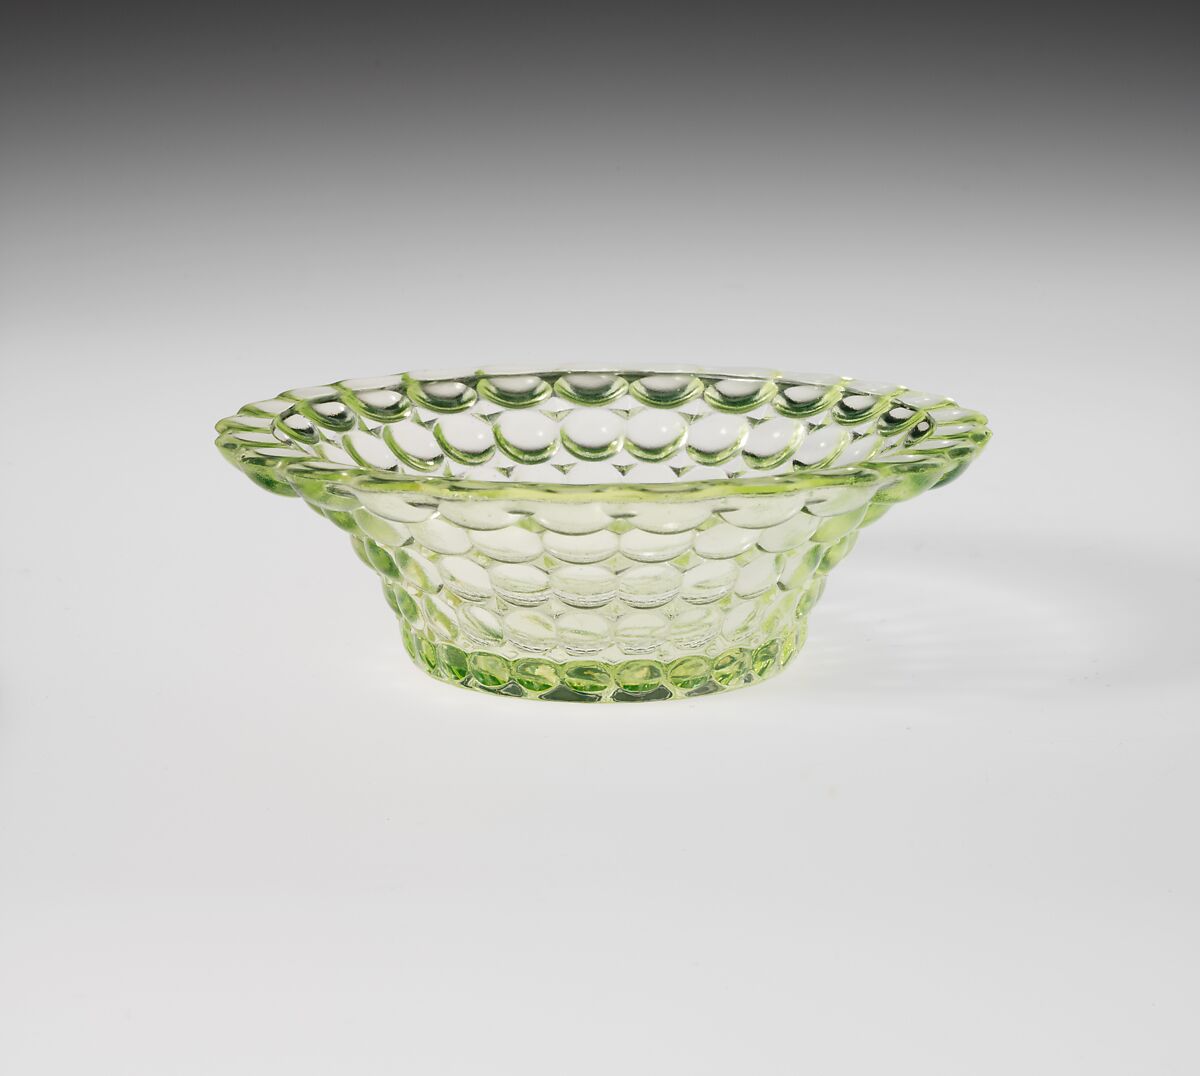 Sauce Dish, Probably Adams and Company, Pressed glass, American 